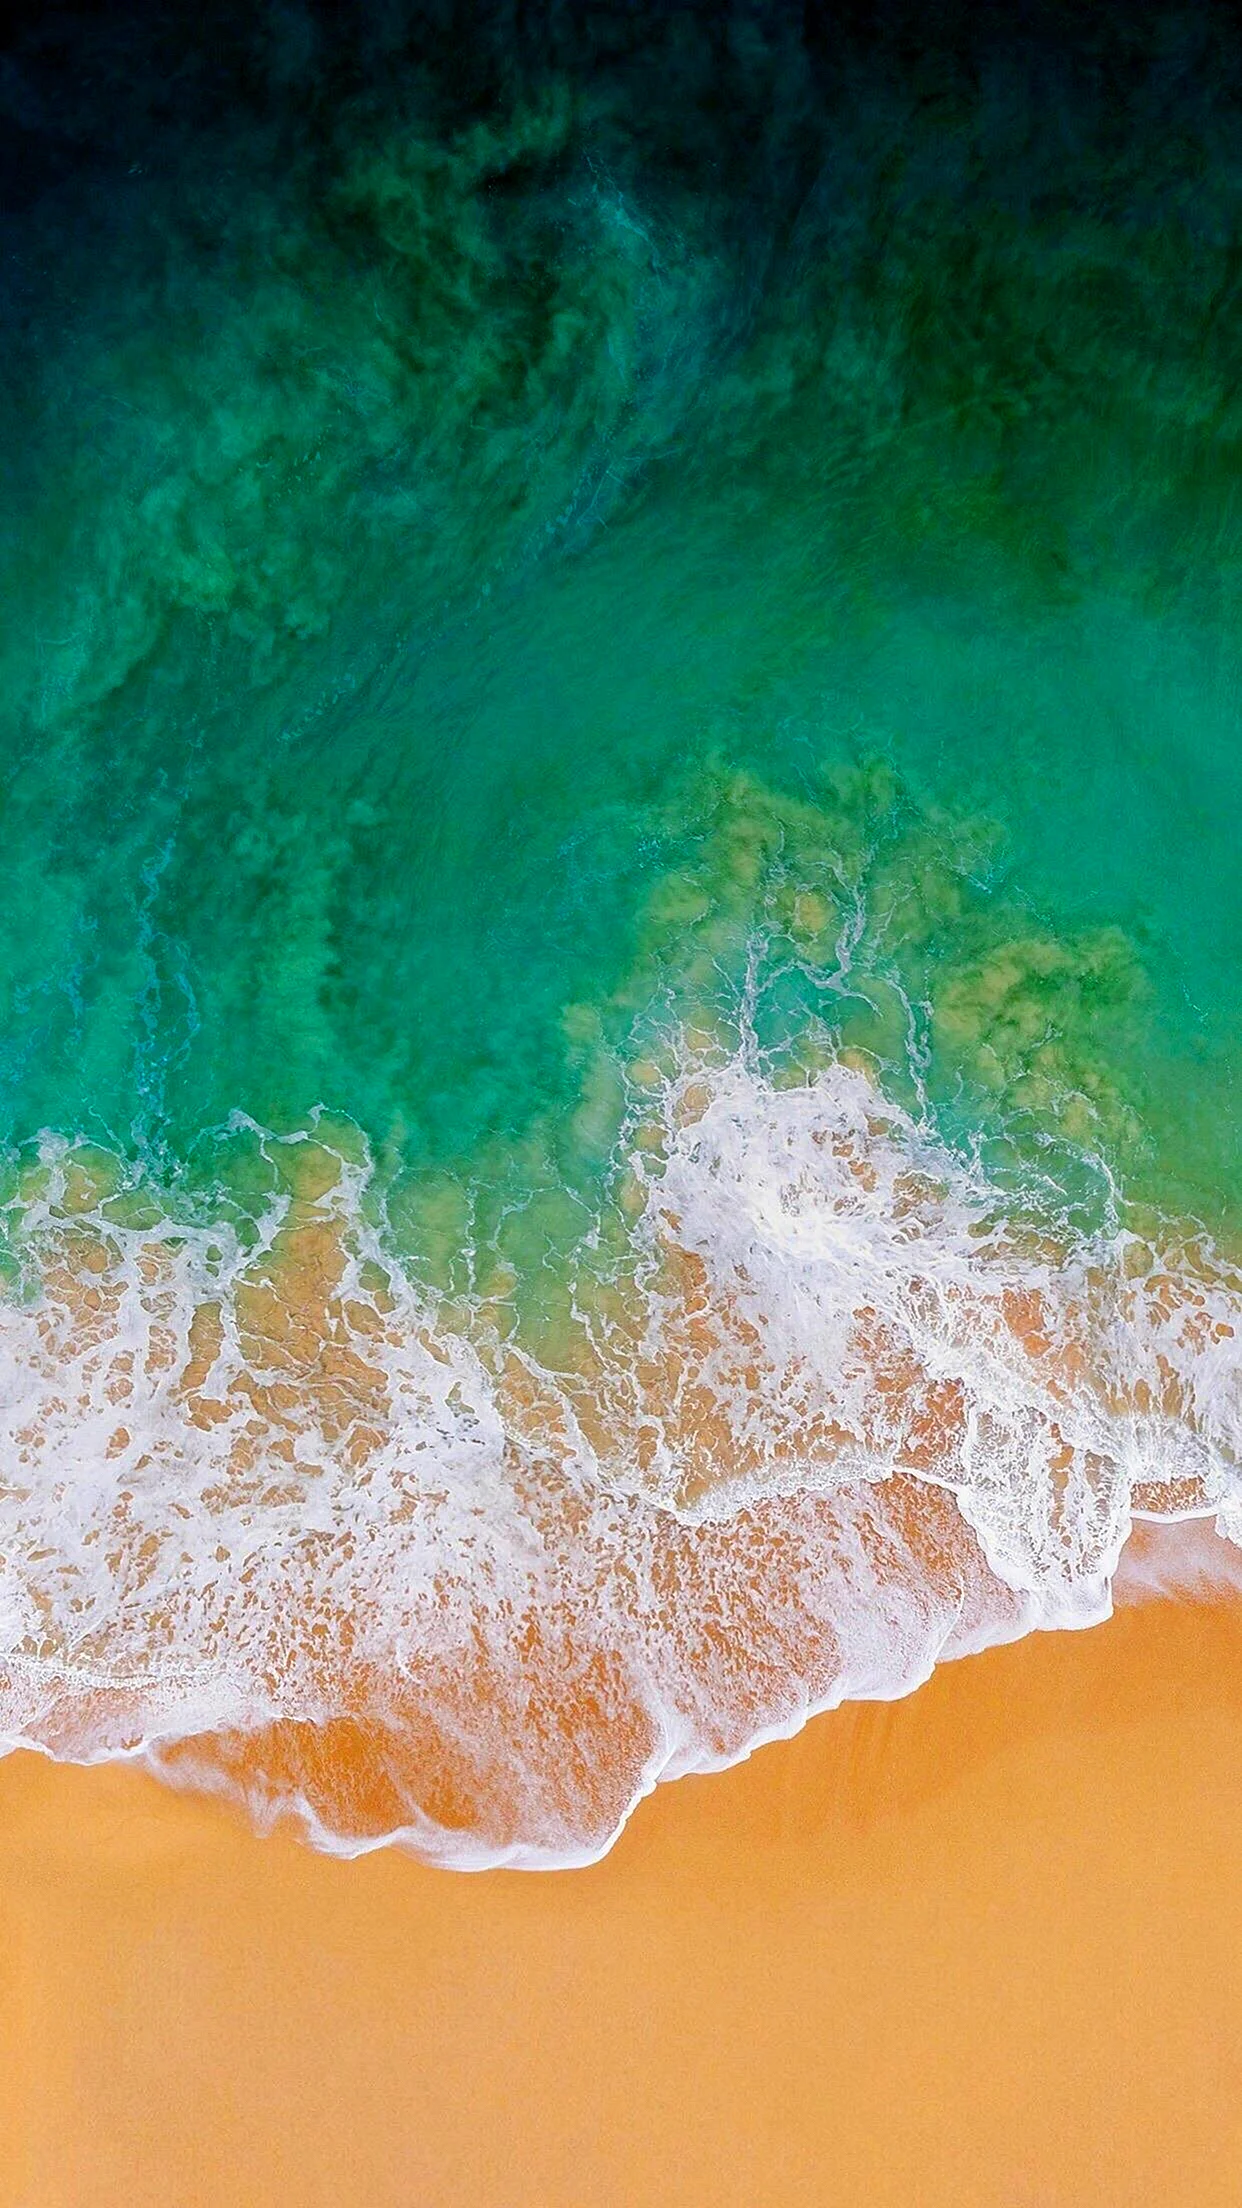 IOS Wallpaper For iPhone